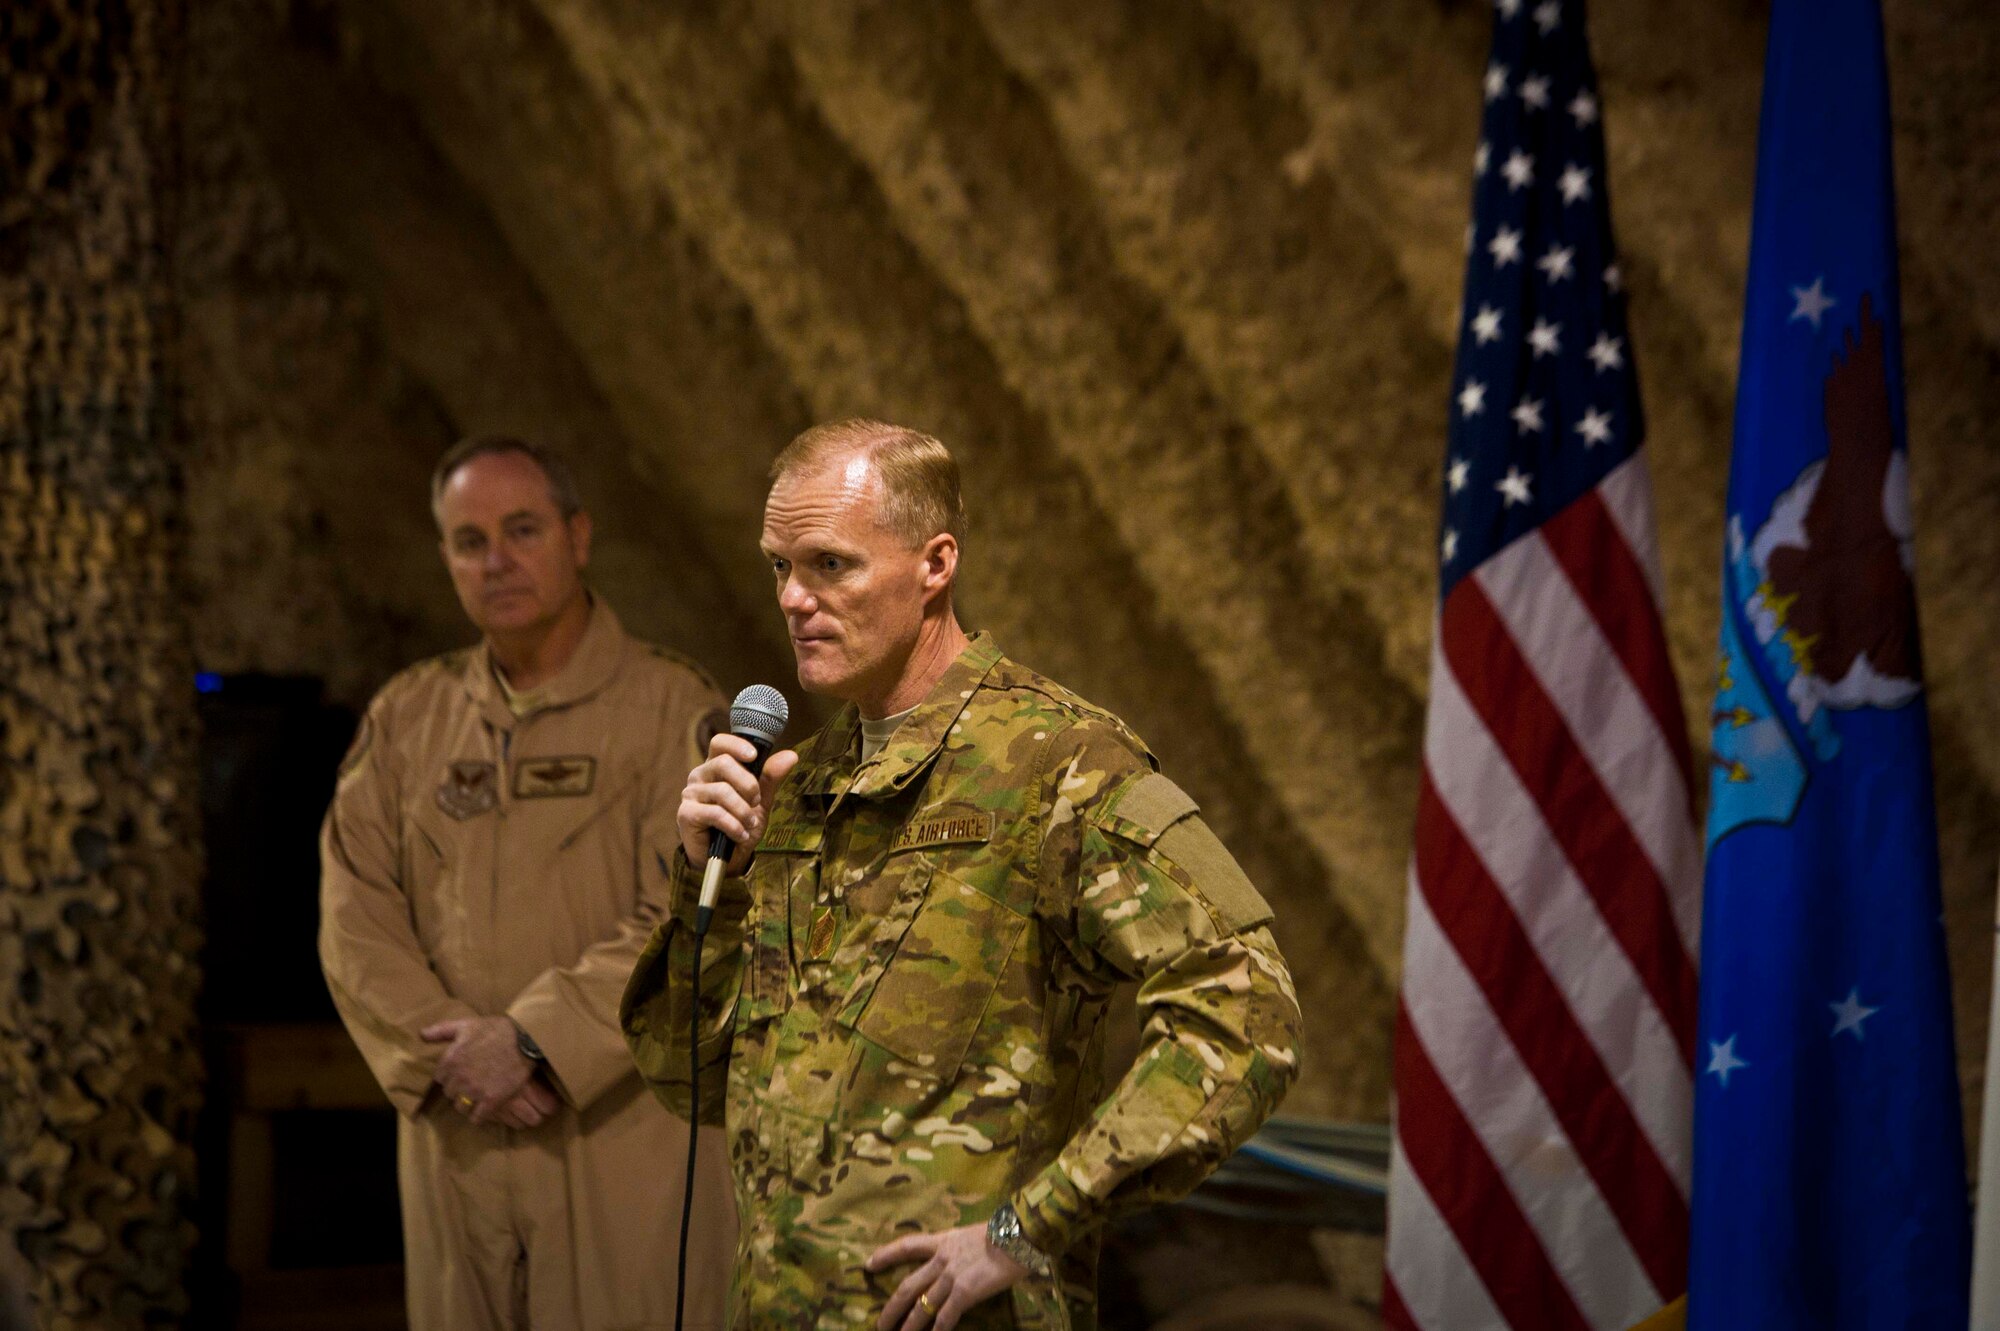 Chief Master Sgt. of the Air Force James Cody and Air Force Chief of Staff Gen. Mark A. Welsh III visit with Airmen at Kandahar Airfield, Afghanistan, Feb. 4. Cody and Welsh visited KAF to thank the Airmen for their service and to discuss their priorities for the Air Force. “Fundamental to who we are is how we treat each other,” Cody said. “Respect fosters trust, and when we trust each other, we do just what you do out here in the AOR--we accomplish anything we set our minds to do.” (U.S. Air Force photo/Senior Airman Scott Saldukas)